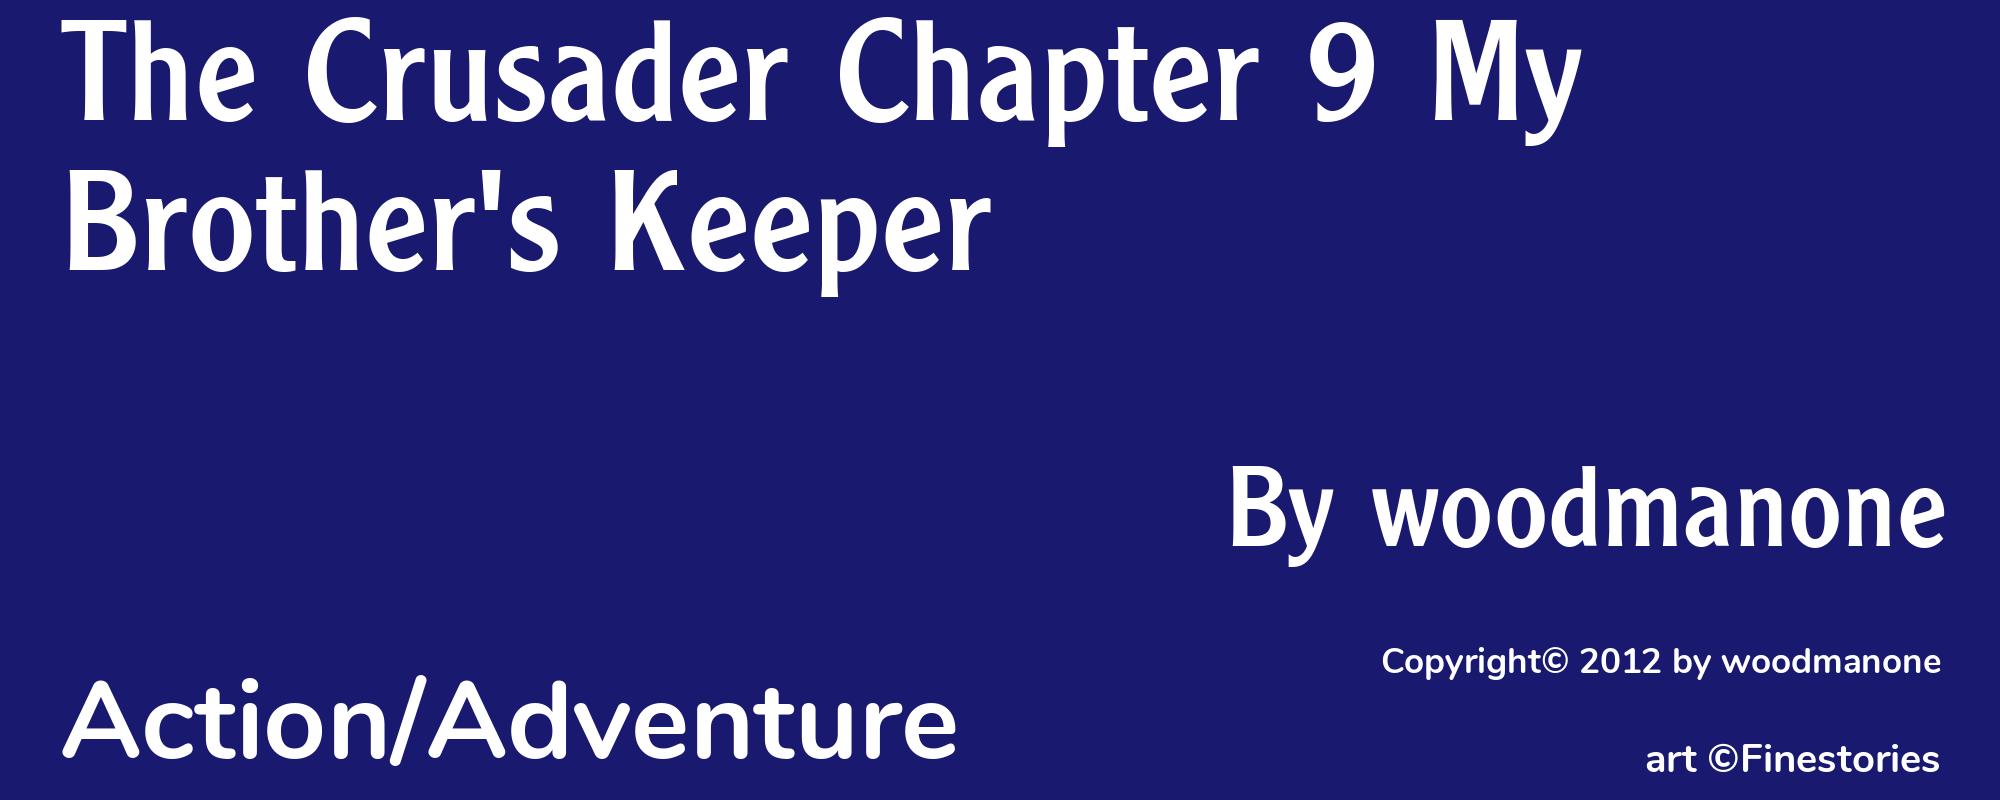 The Crusader Chapter 9 My Brother's Keeper - Cover